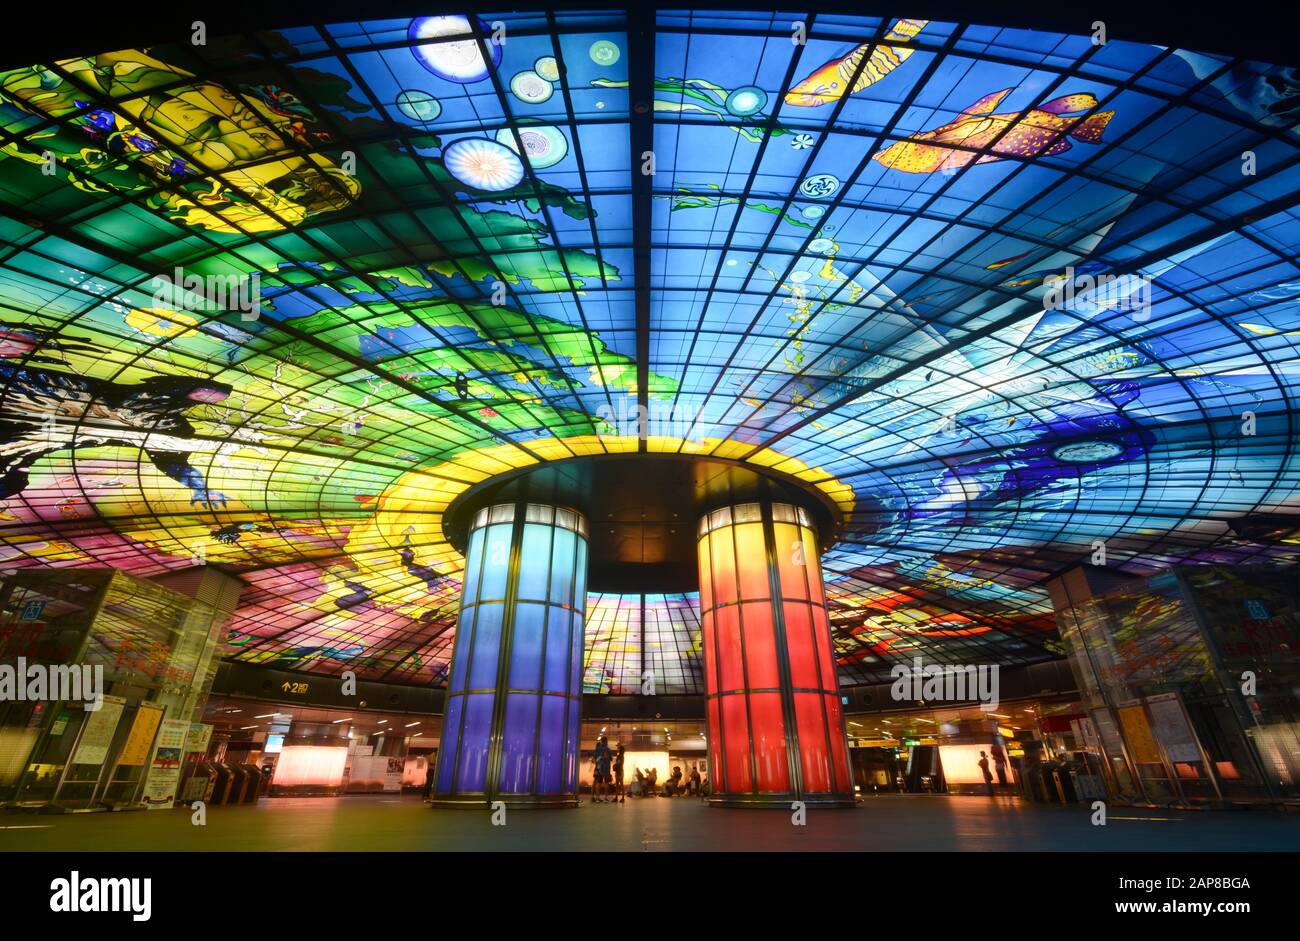 KAOHSIUNG, TAIWAN - APRIL 6, 2018 - Dome of Light glass mural installation at Formosa Boulevard Station Stock Photo